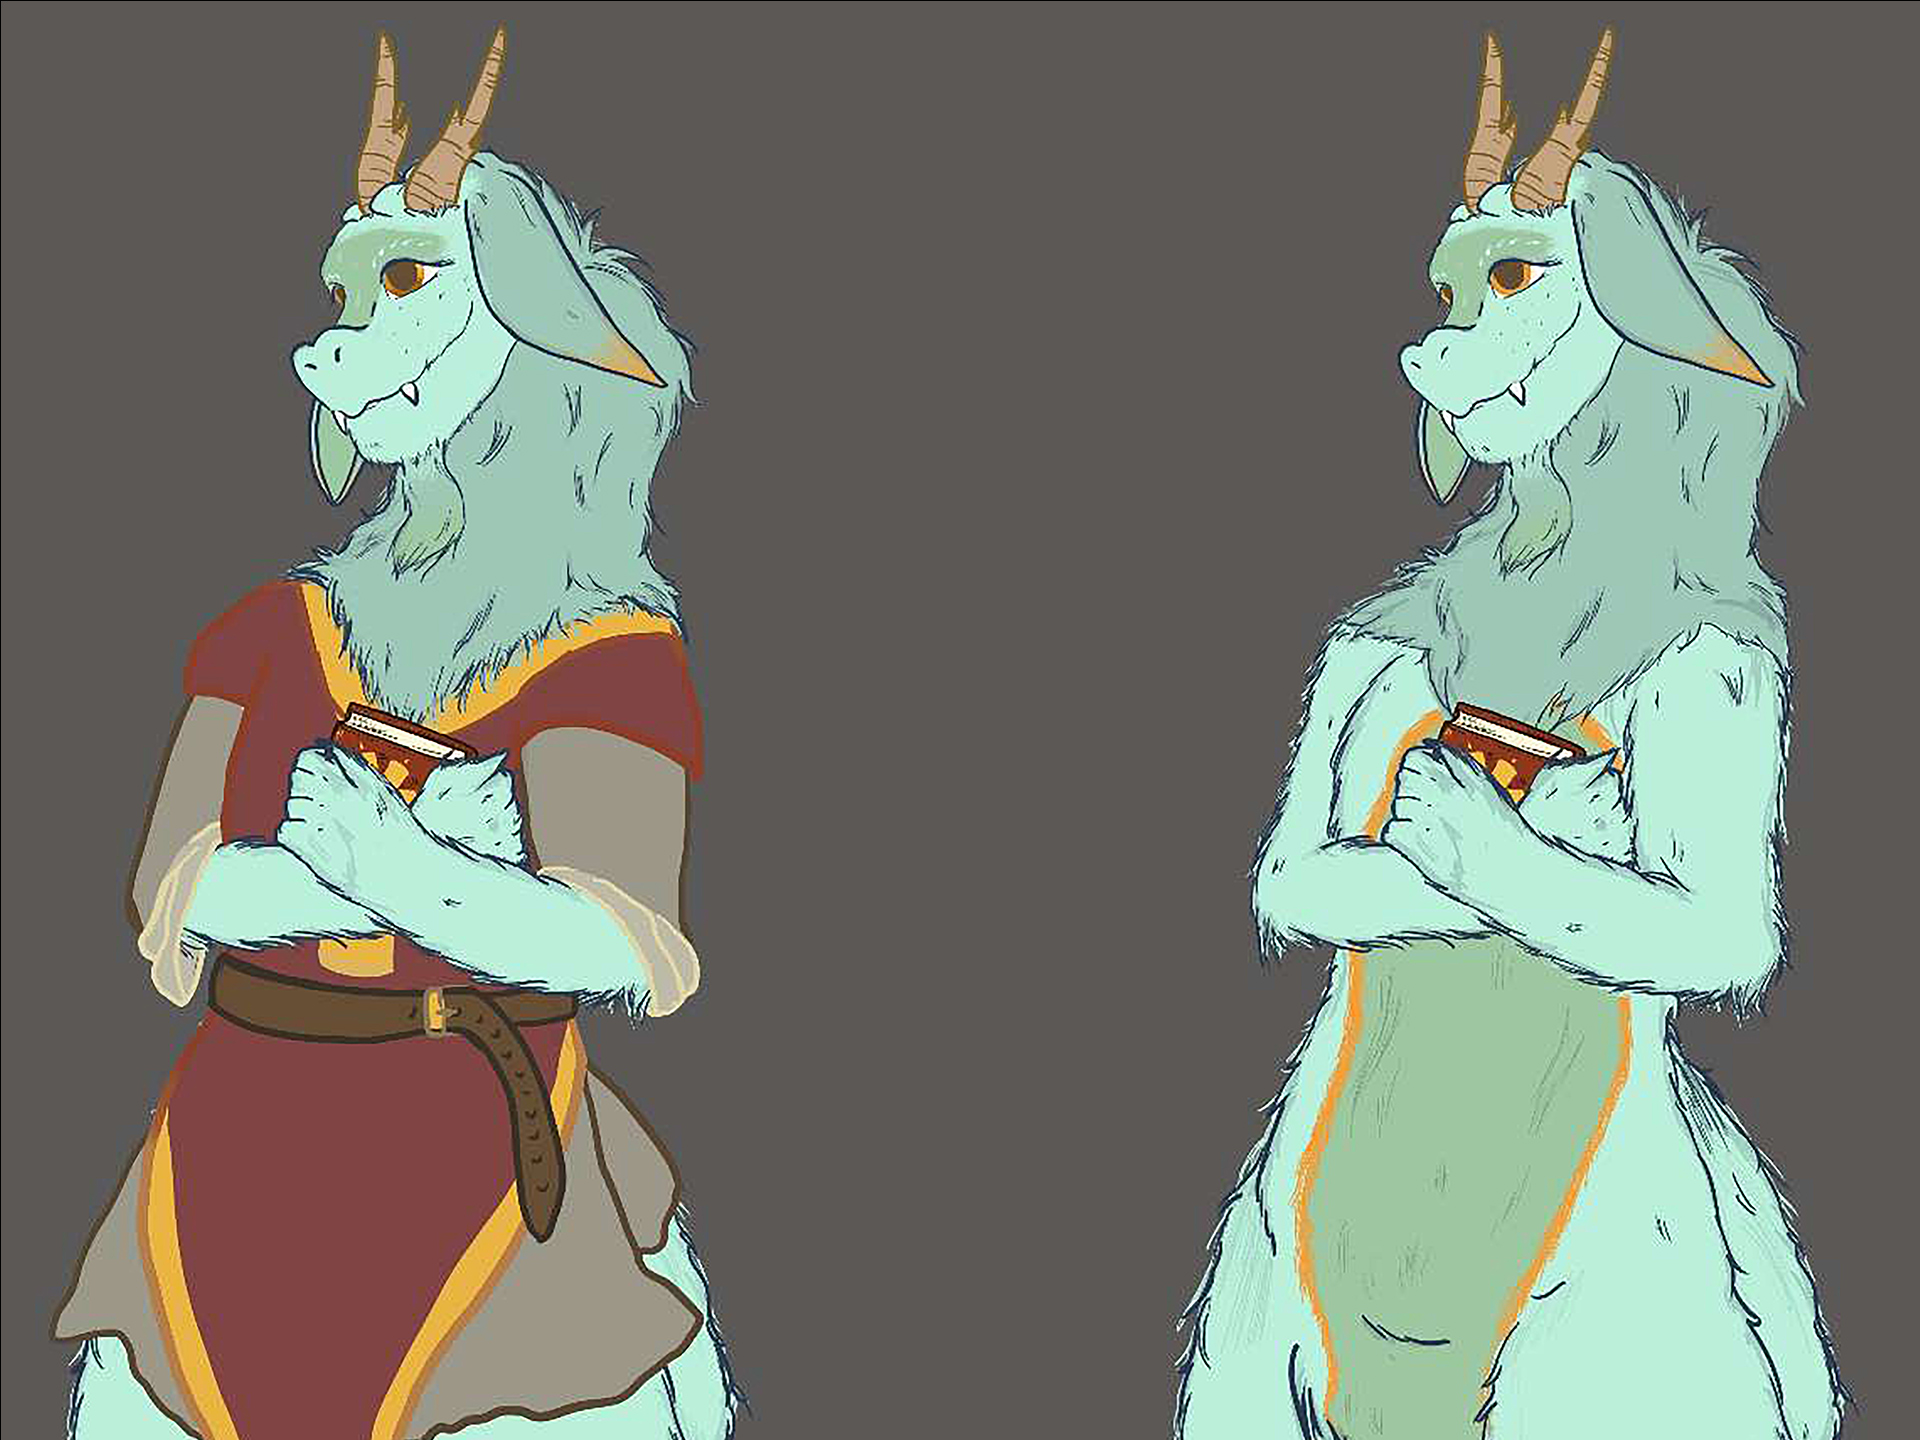 A close crop of the concept art for a fluffy, bipedal dragonborn character.